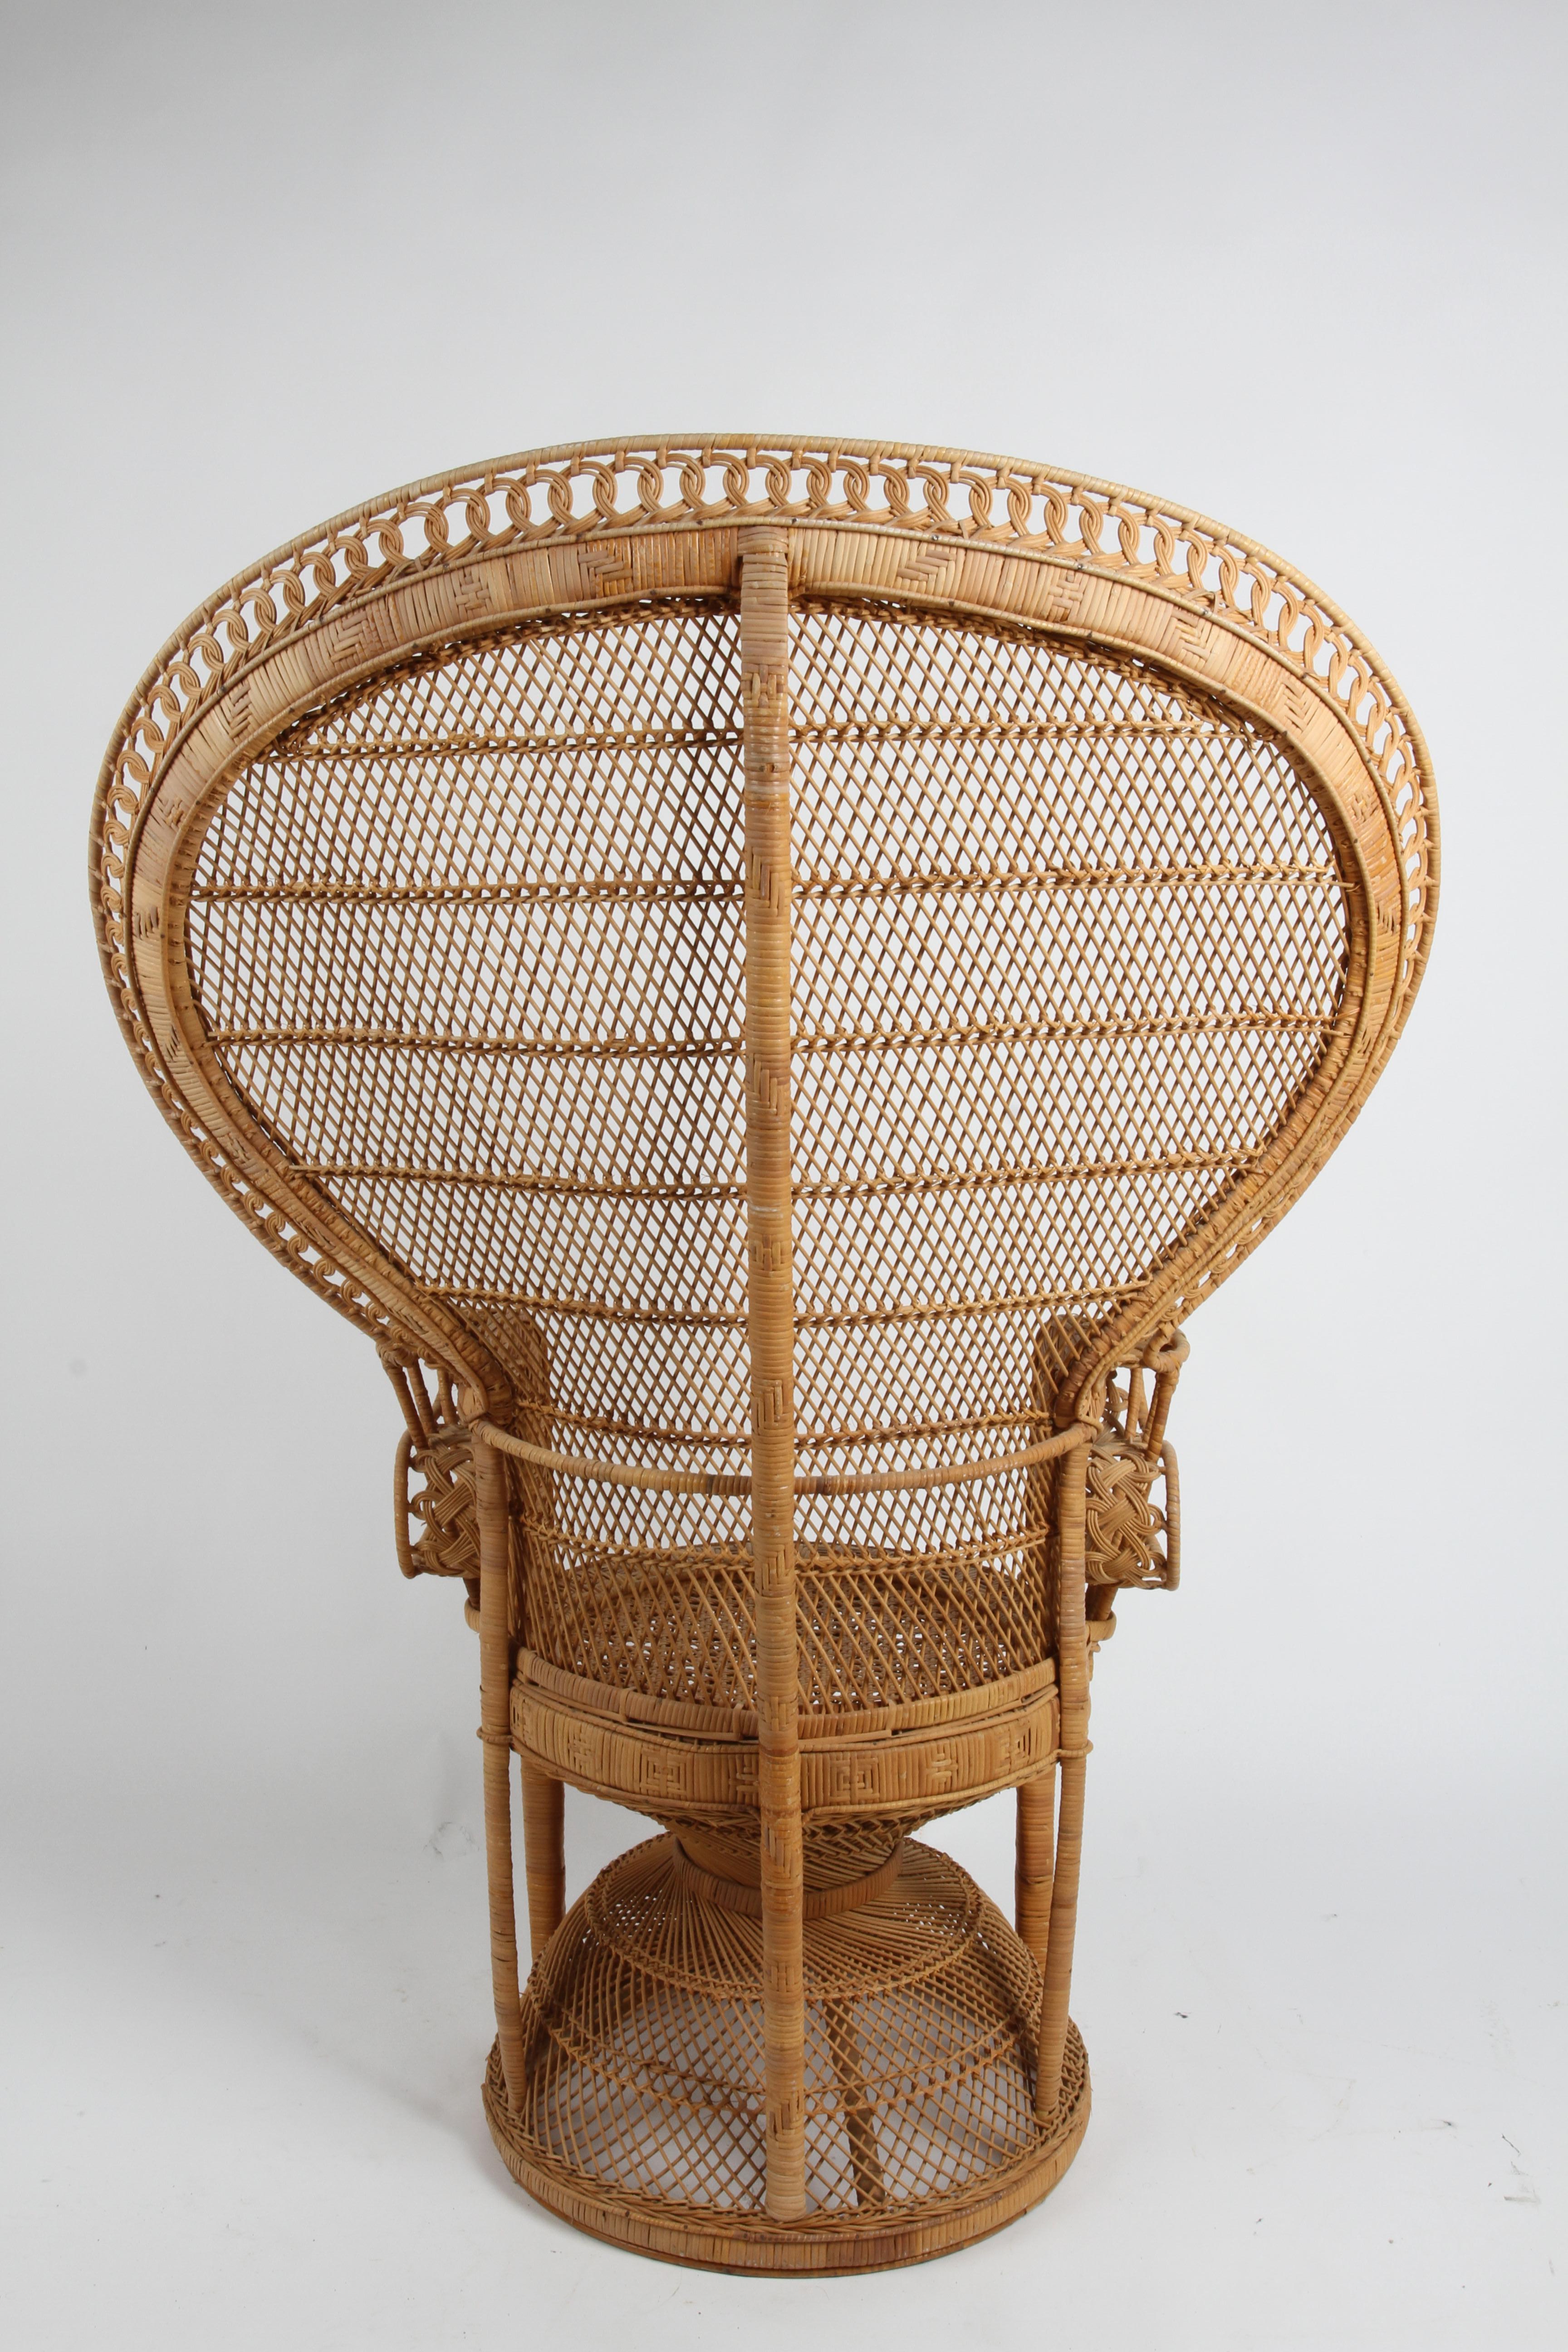 Vintage 1970s Rattan & Wicker Handcrafted Boho Chic Emmanuelle Peacock Chair For Sale 5